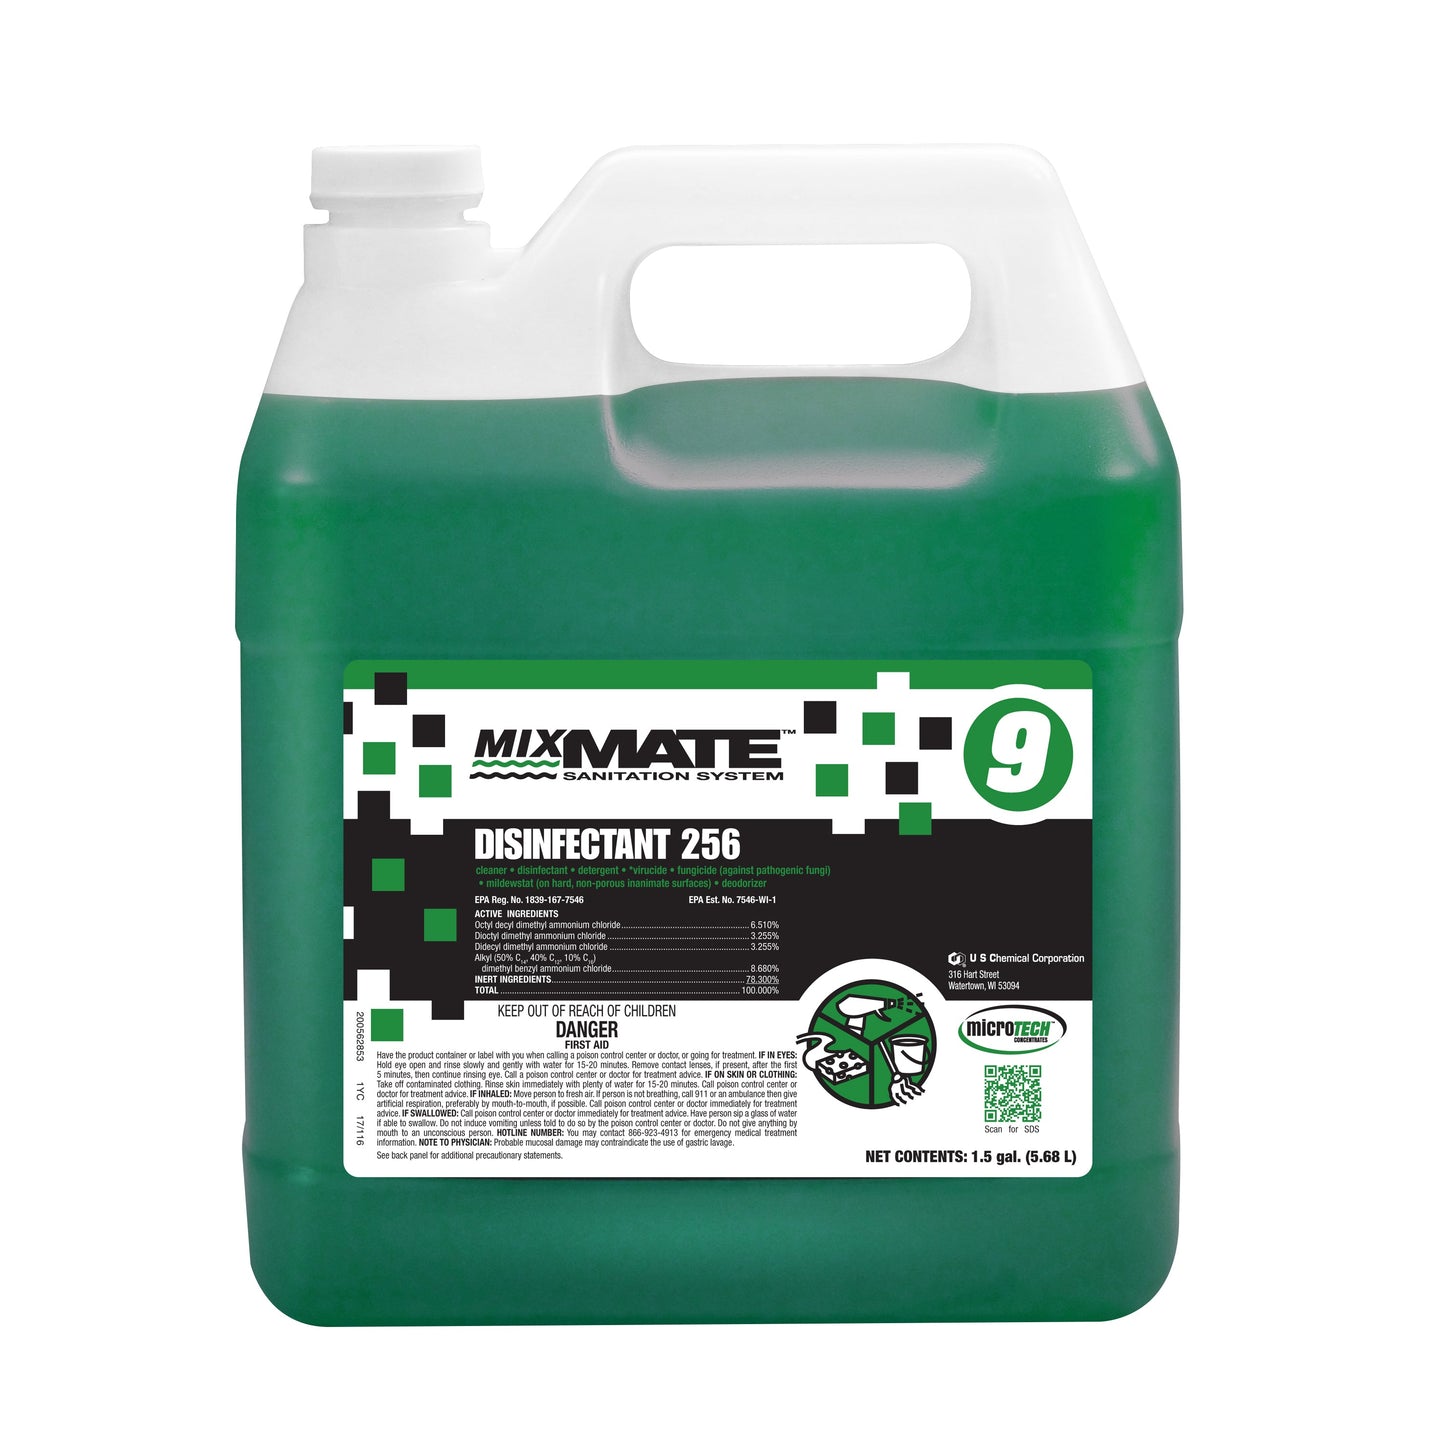 MixMATE microTECH Disinfectant 256